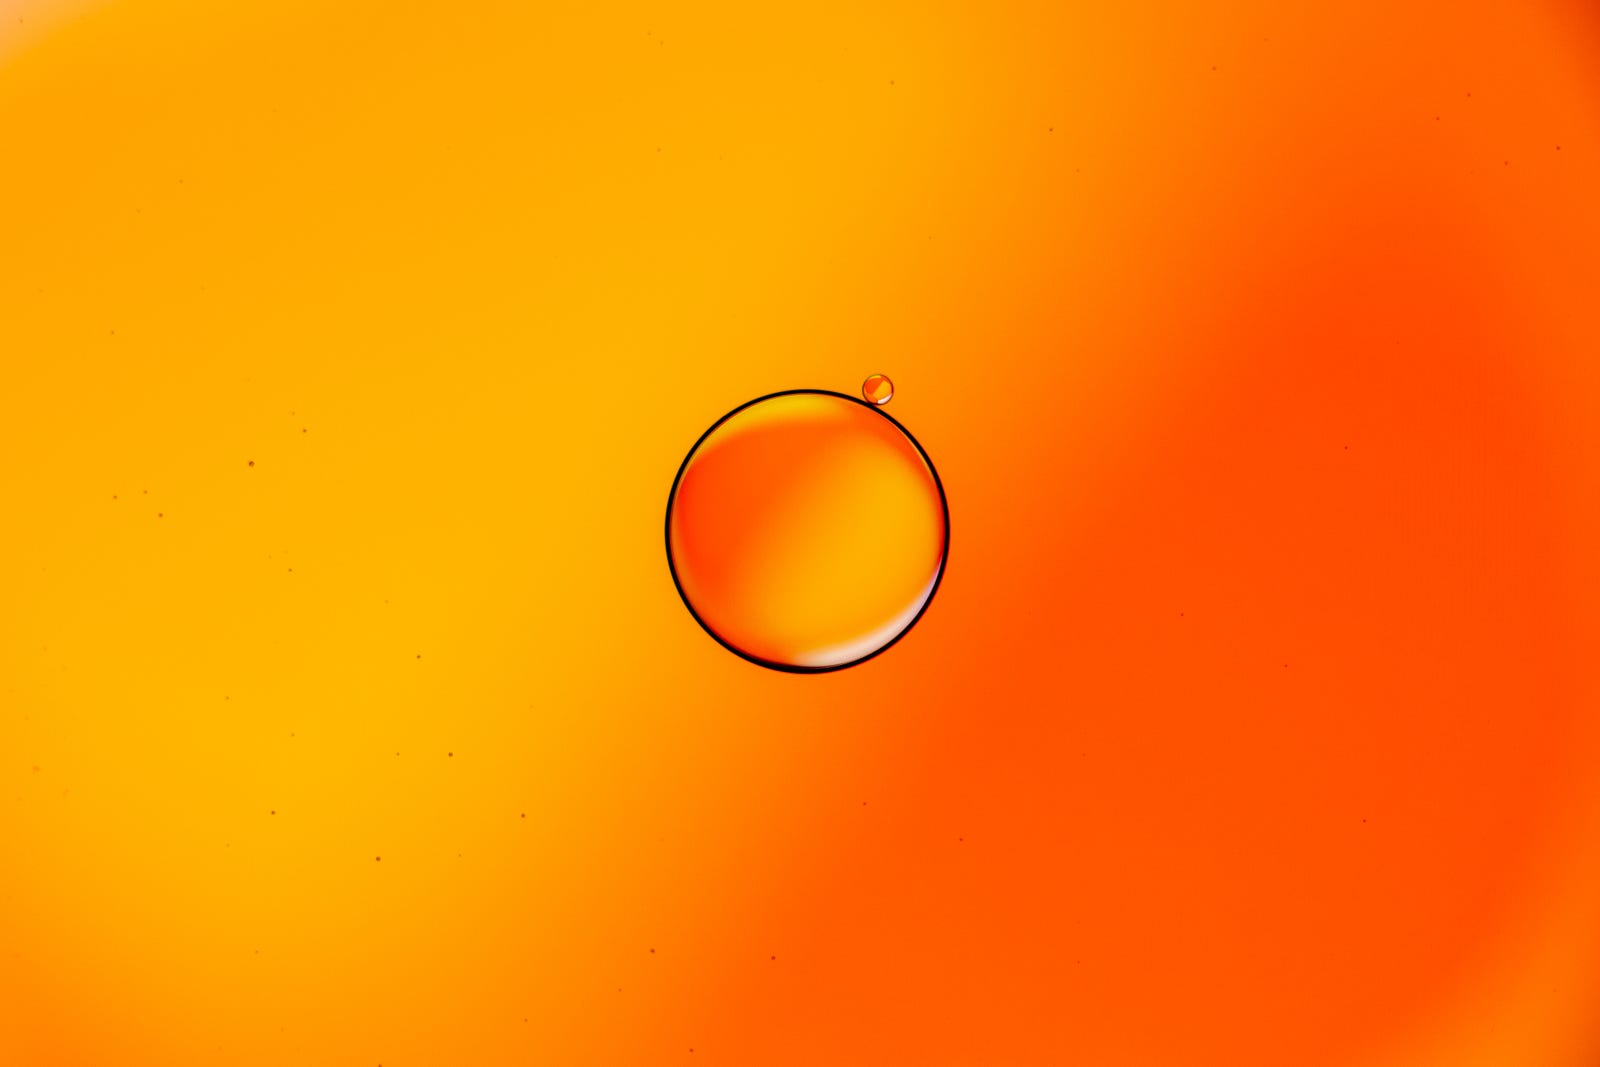 A close-up of a single drop of olive oil, with the oily bubble sitting on an orange background. Olive oil consumption is associated with better heart health.